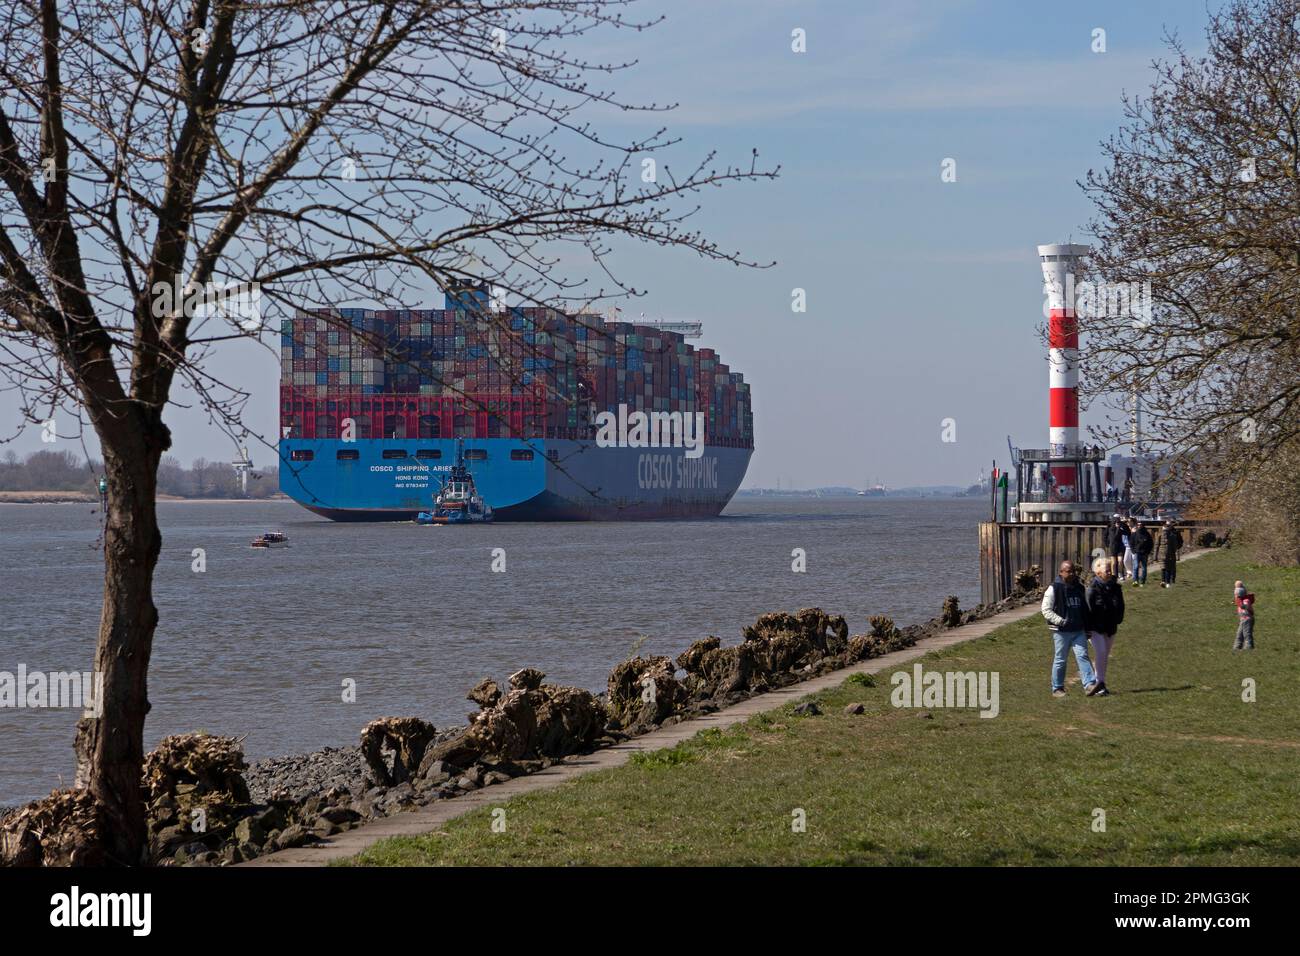 Cosco Shipping container ship, towboat, Elbe, people, lighthouse, Blankenese, Hamburg, Germany Stock Photo